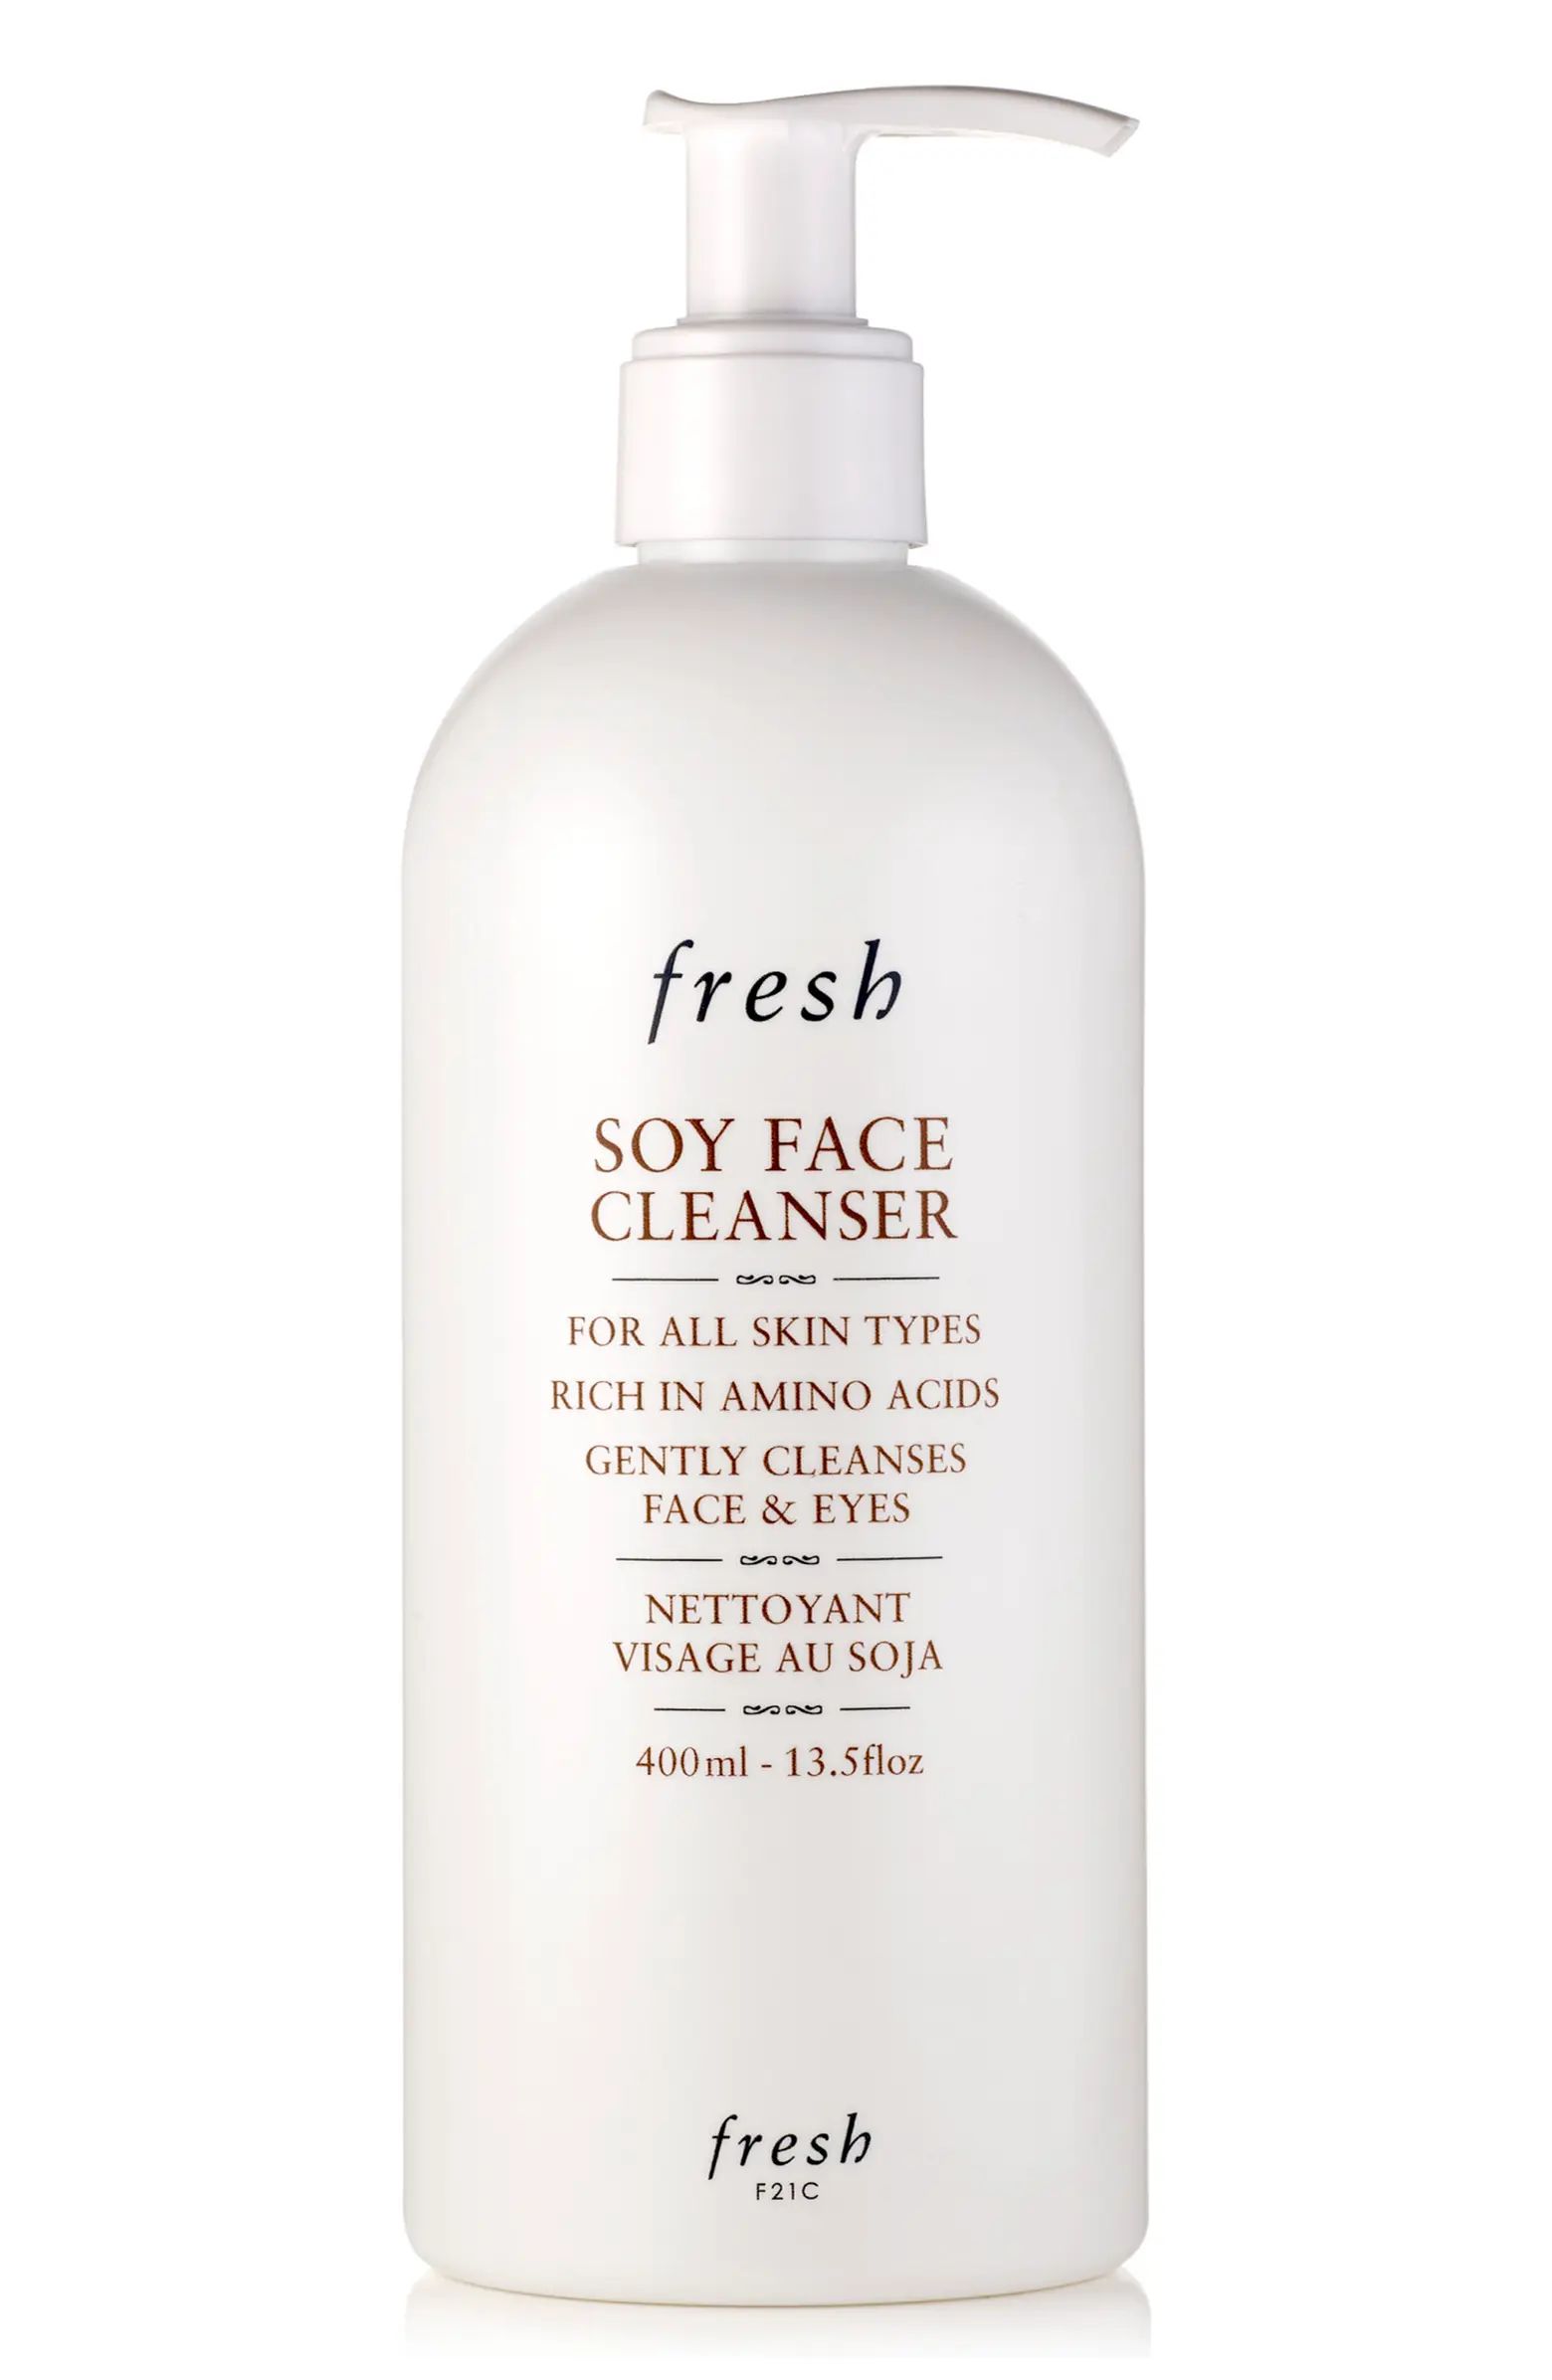 Soy Face Cleanser Makeup Removing Face Wash | Nordstrom